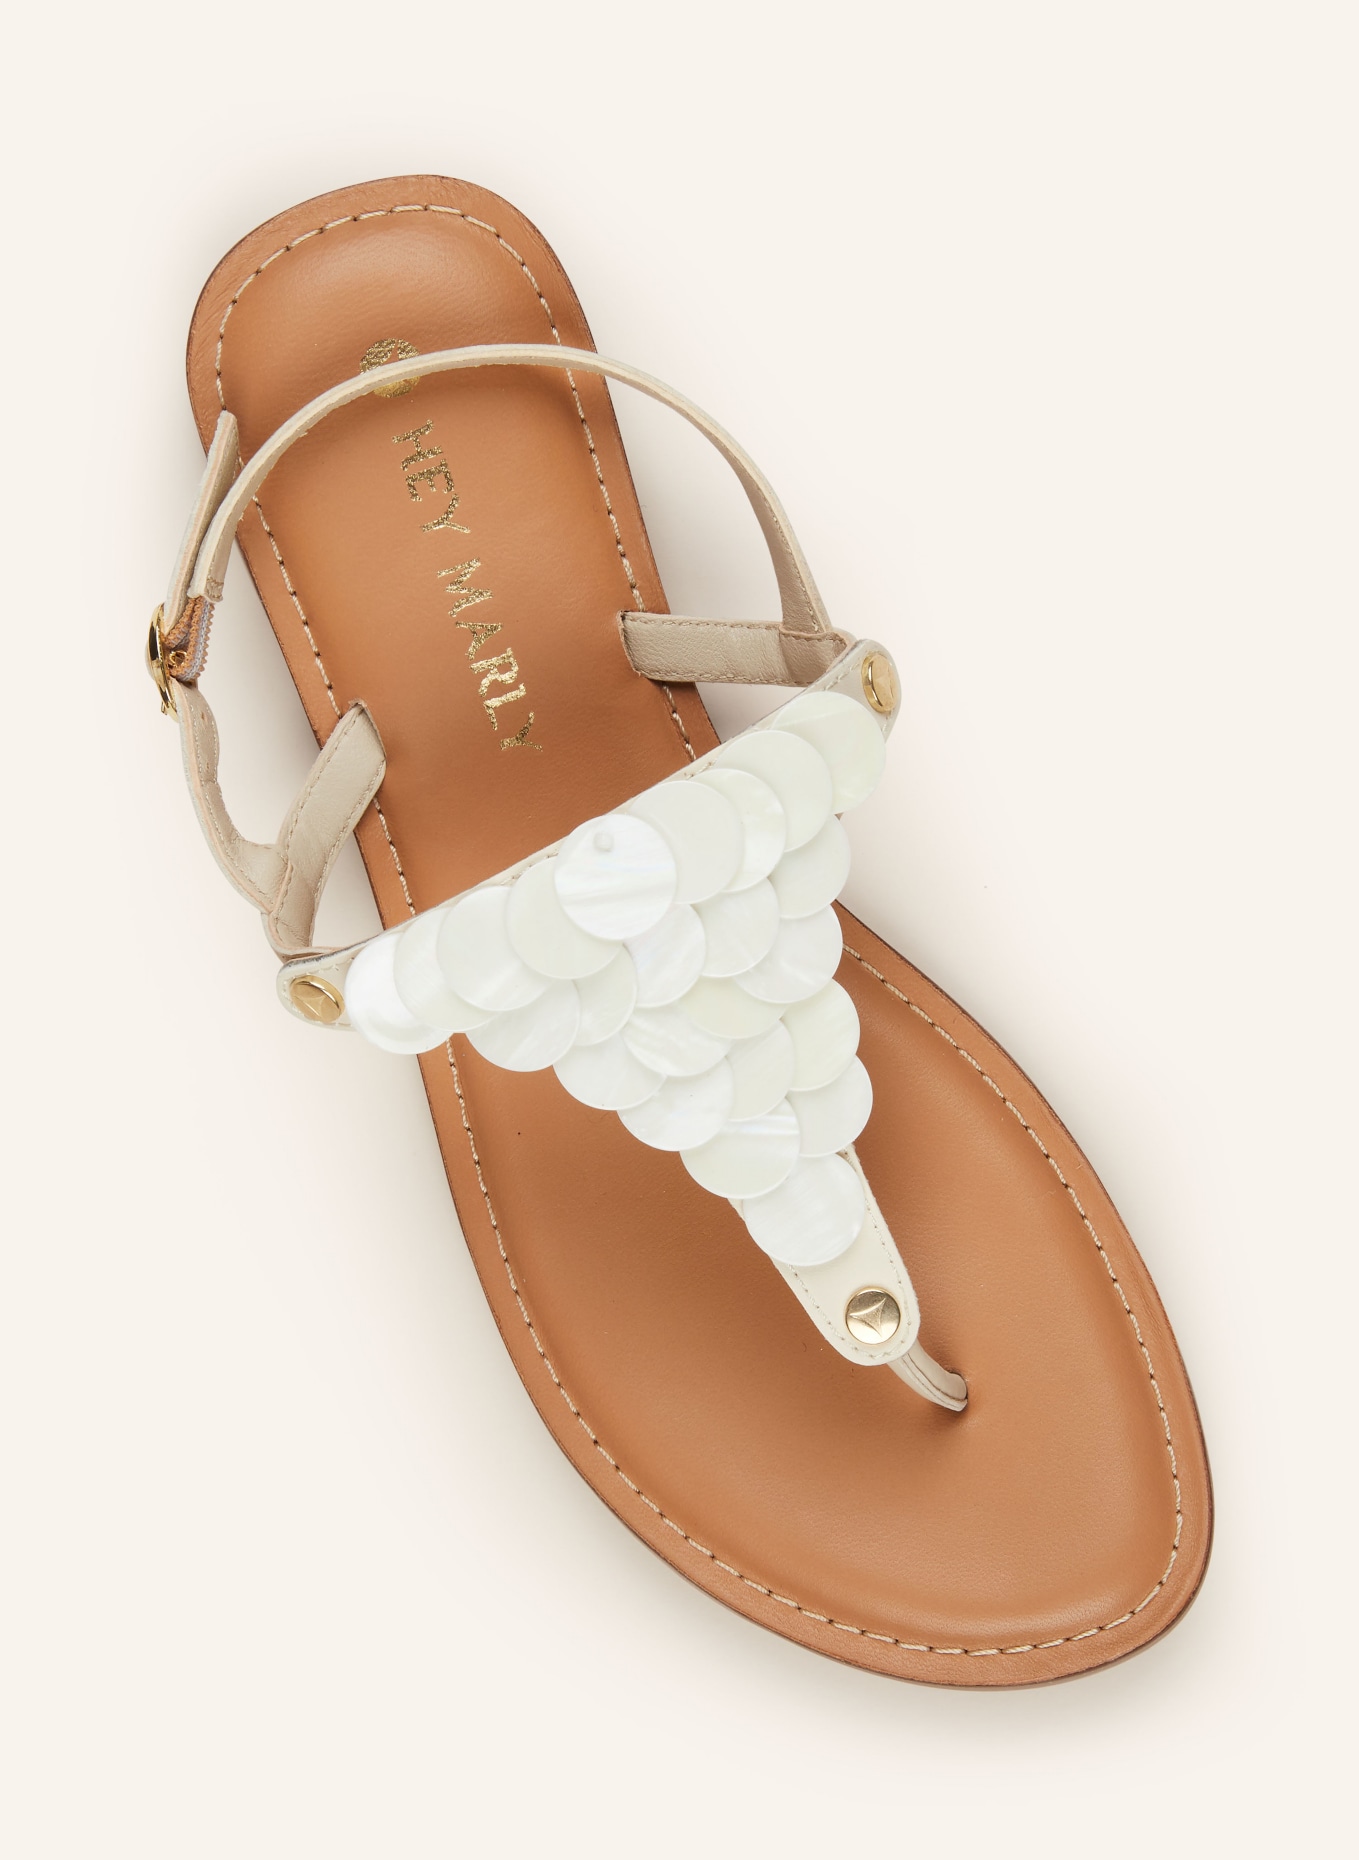 HEY MARLY Sandalen-Topping SHINY PLATE, Farbe: CREME (Bild 2)